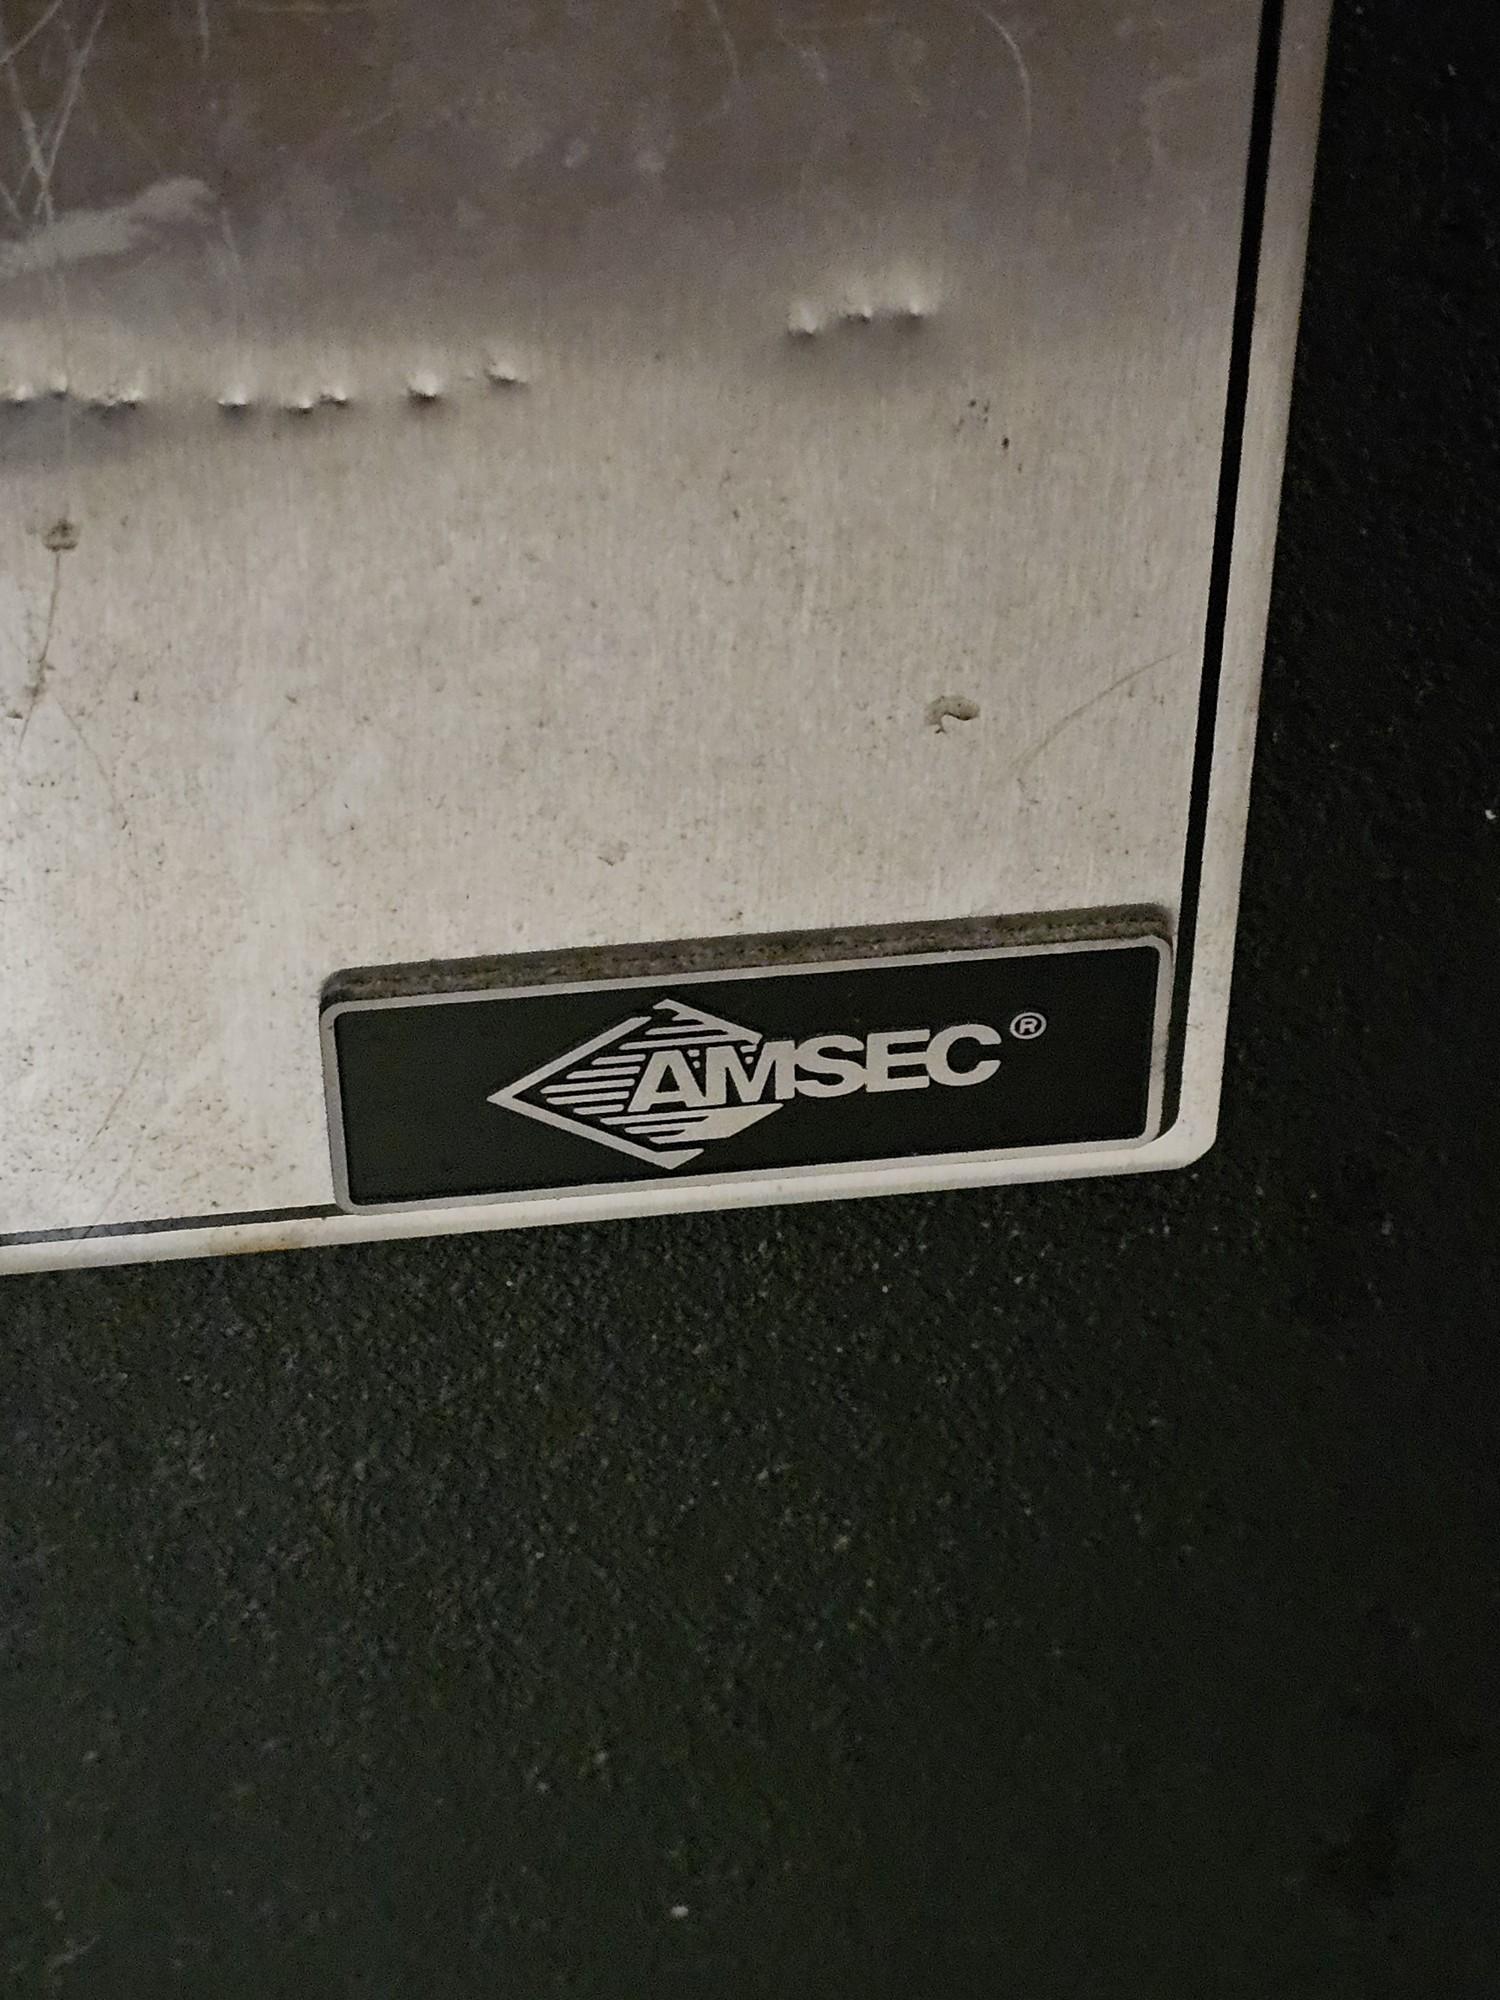 Amsec Fire Resistant Safe with Combination